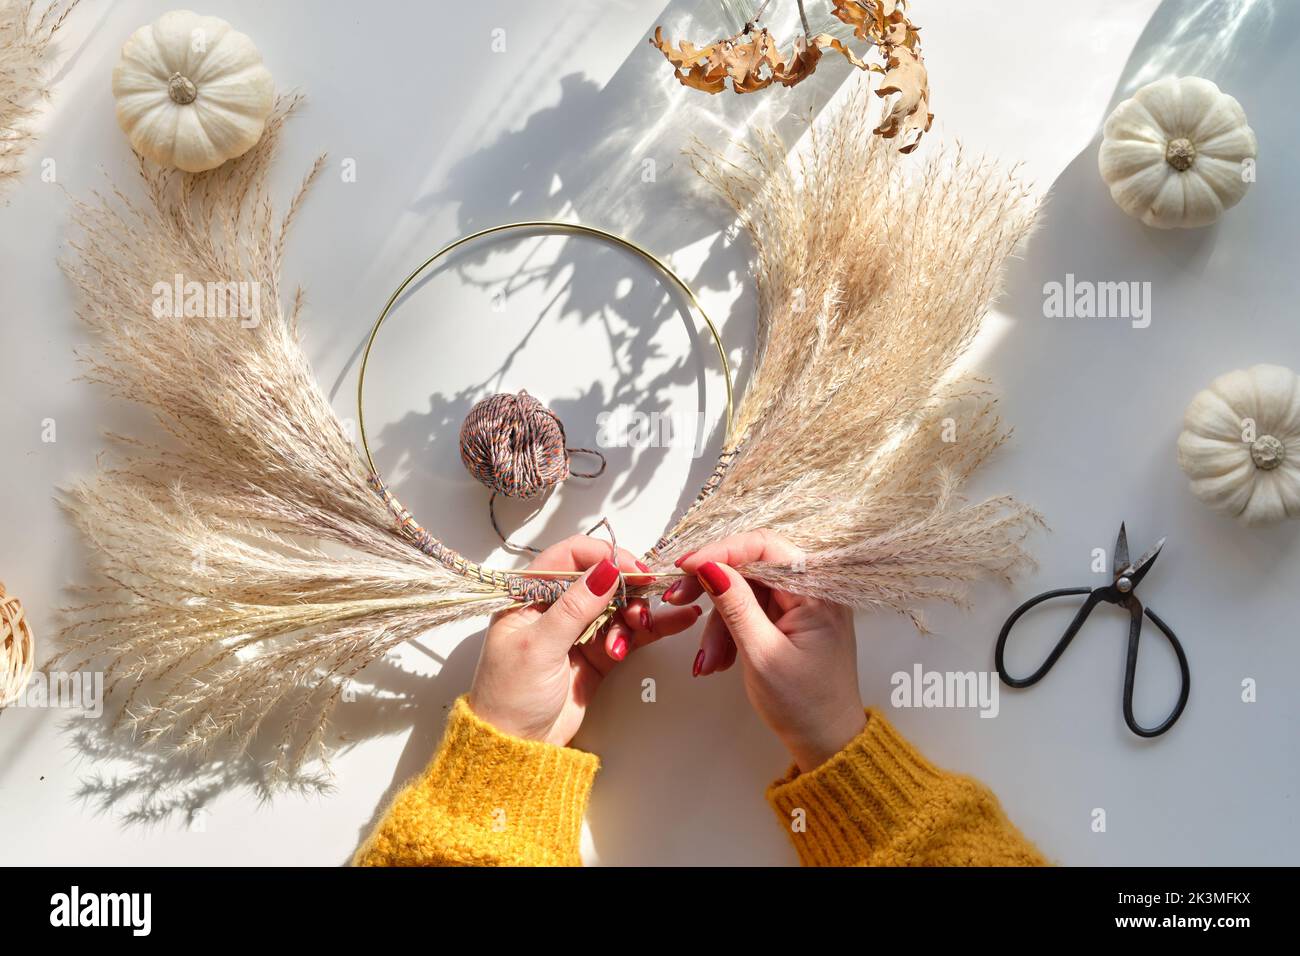 Hands making dried floral wreath from dry pampas grass and Autumn leaves. Hands in sweater tie decorations to metal frame. Stock Photo